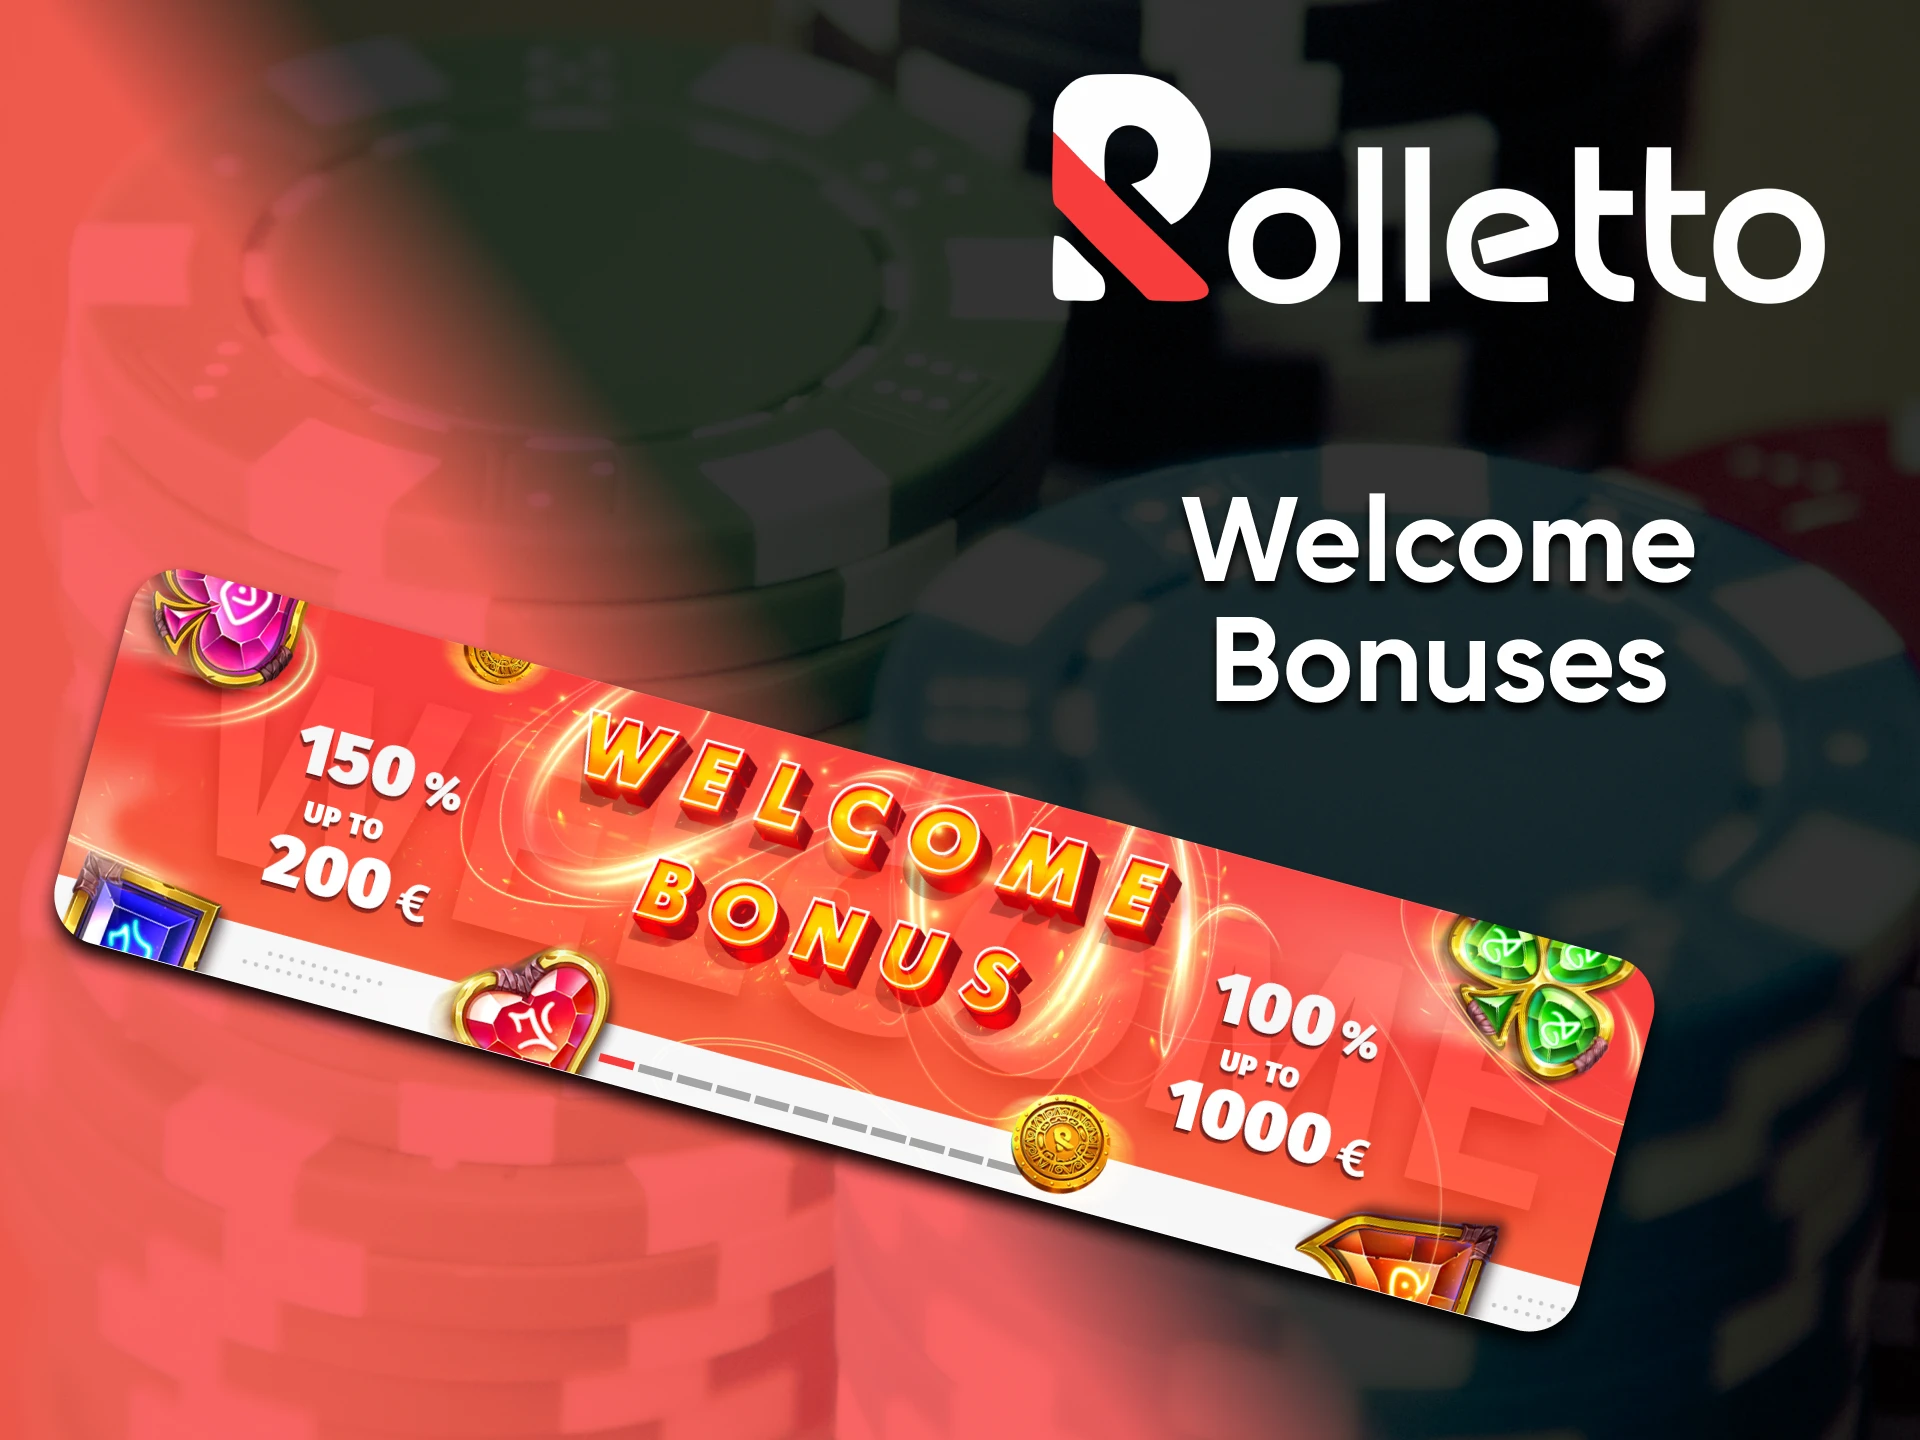 Get a lot of bonuses playing at the casino on the Rolletto website.